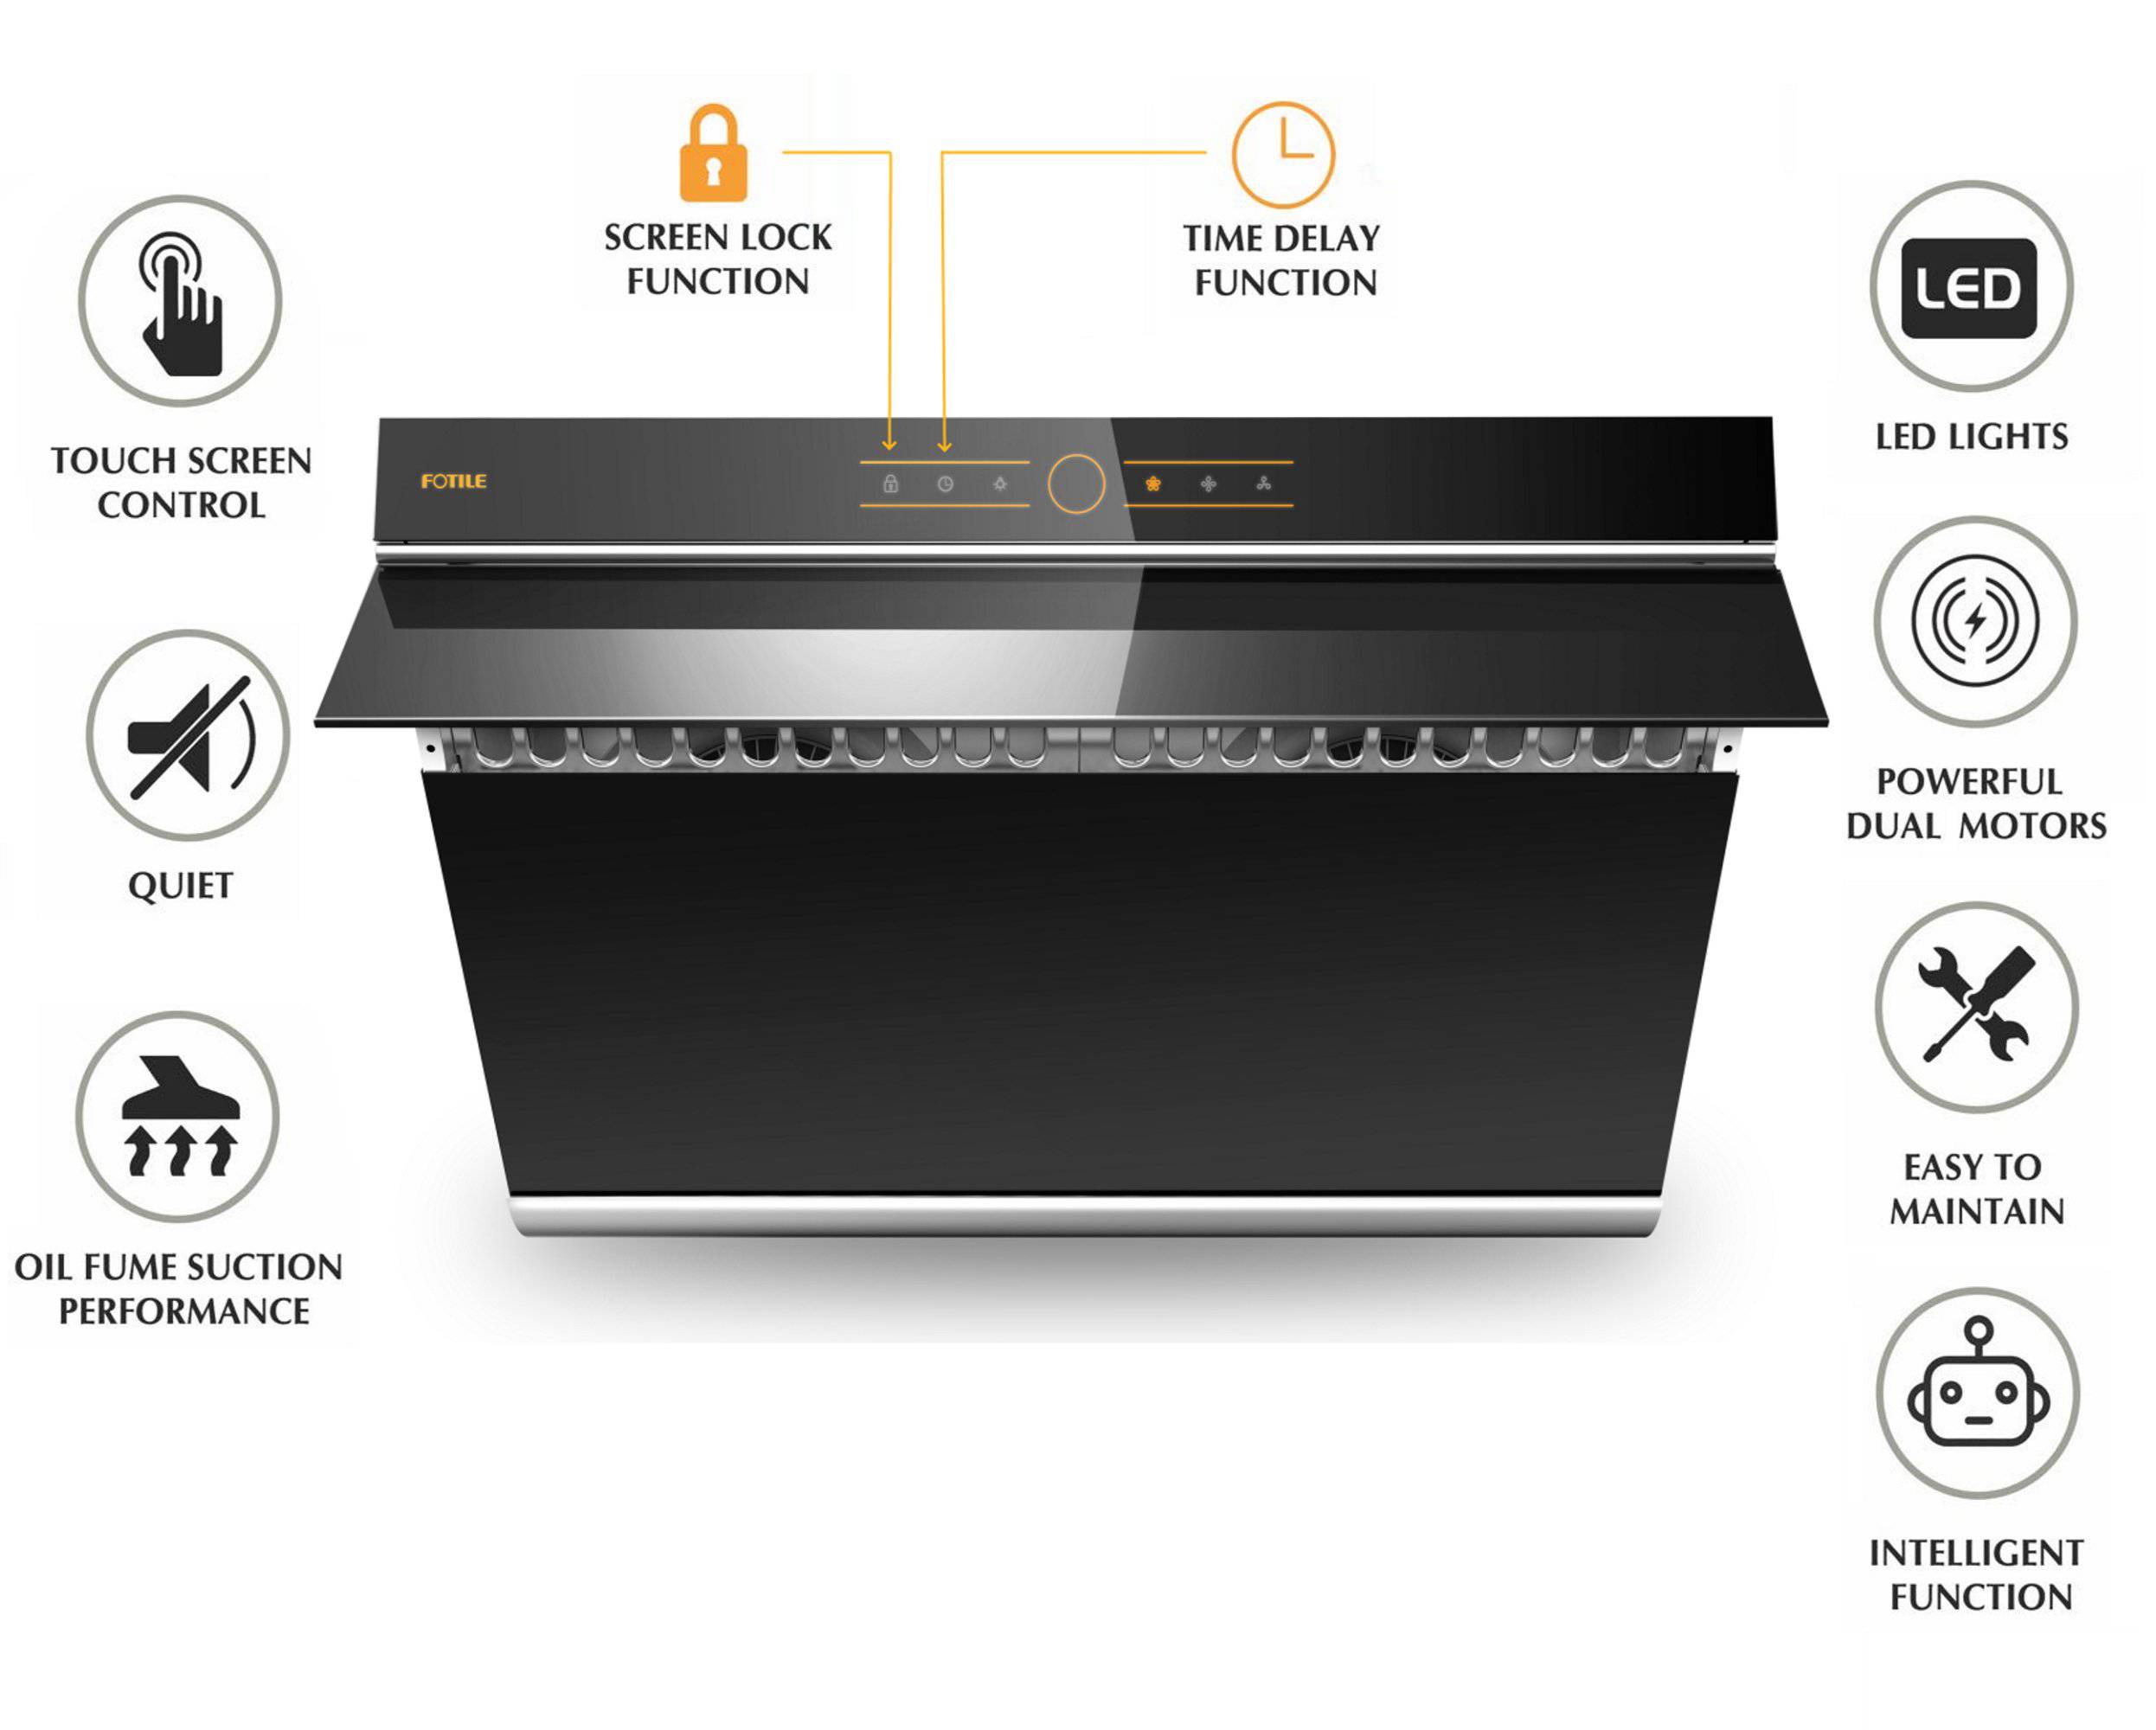 Key Features of the FOTILE JQG9001 and JQG7501 Range Hoods